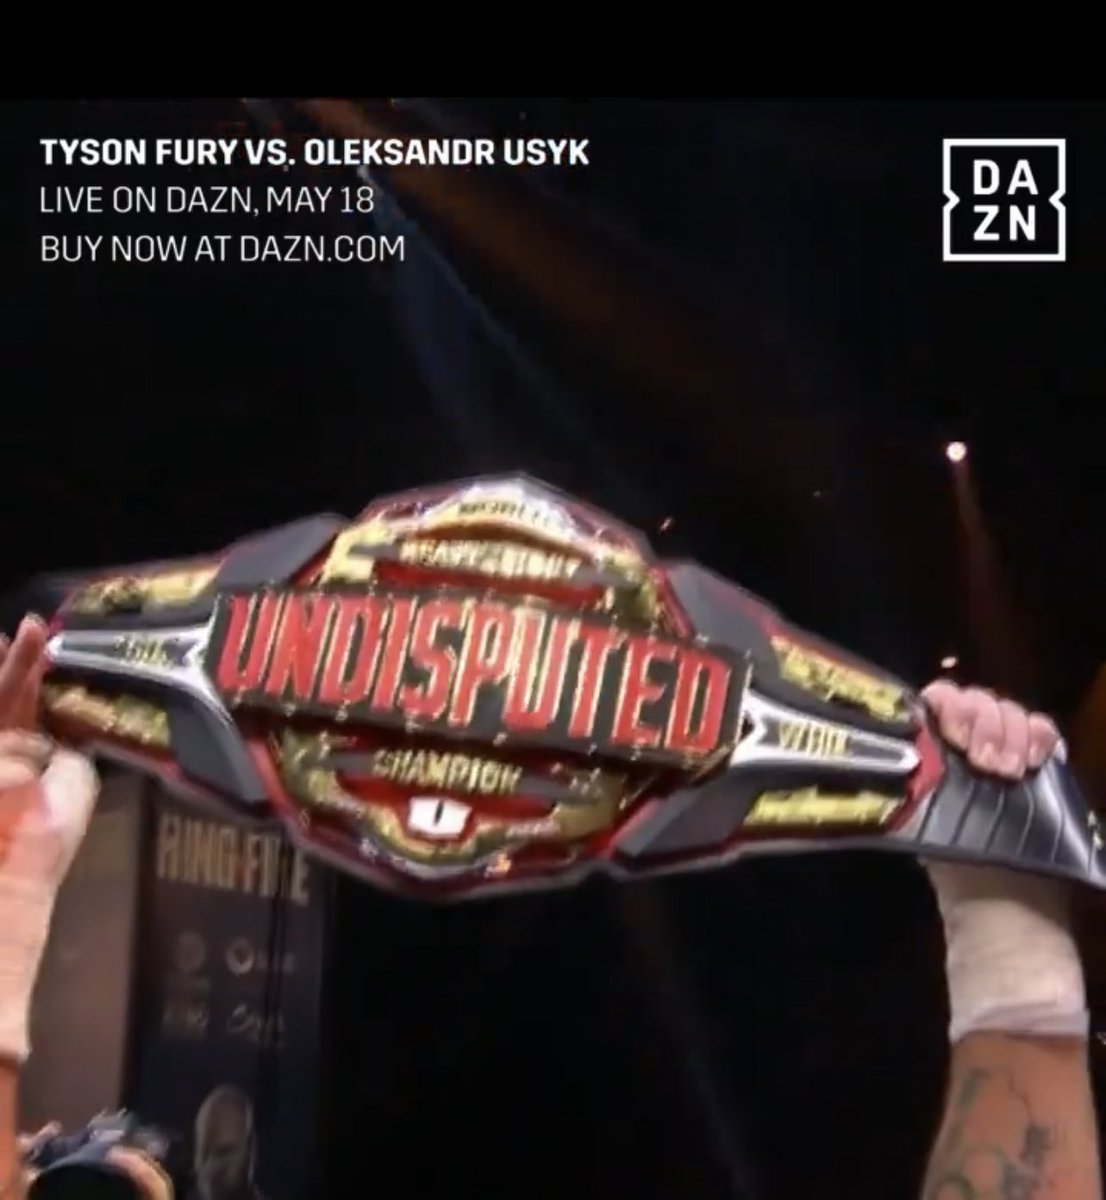 Usyk was also crowned the new TNA champion.